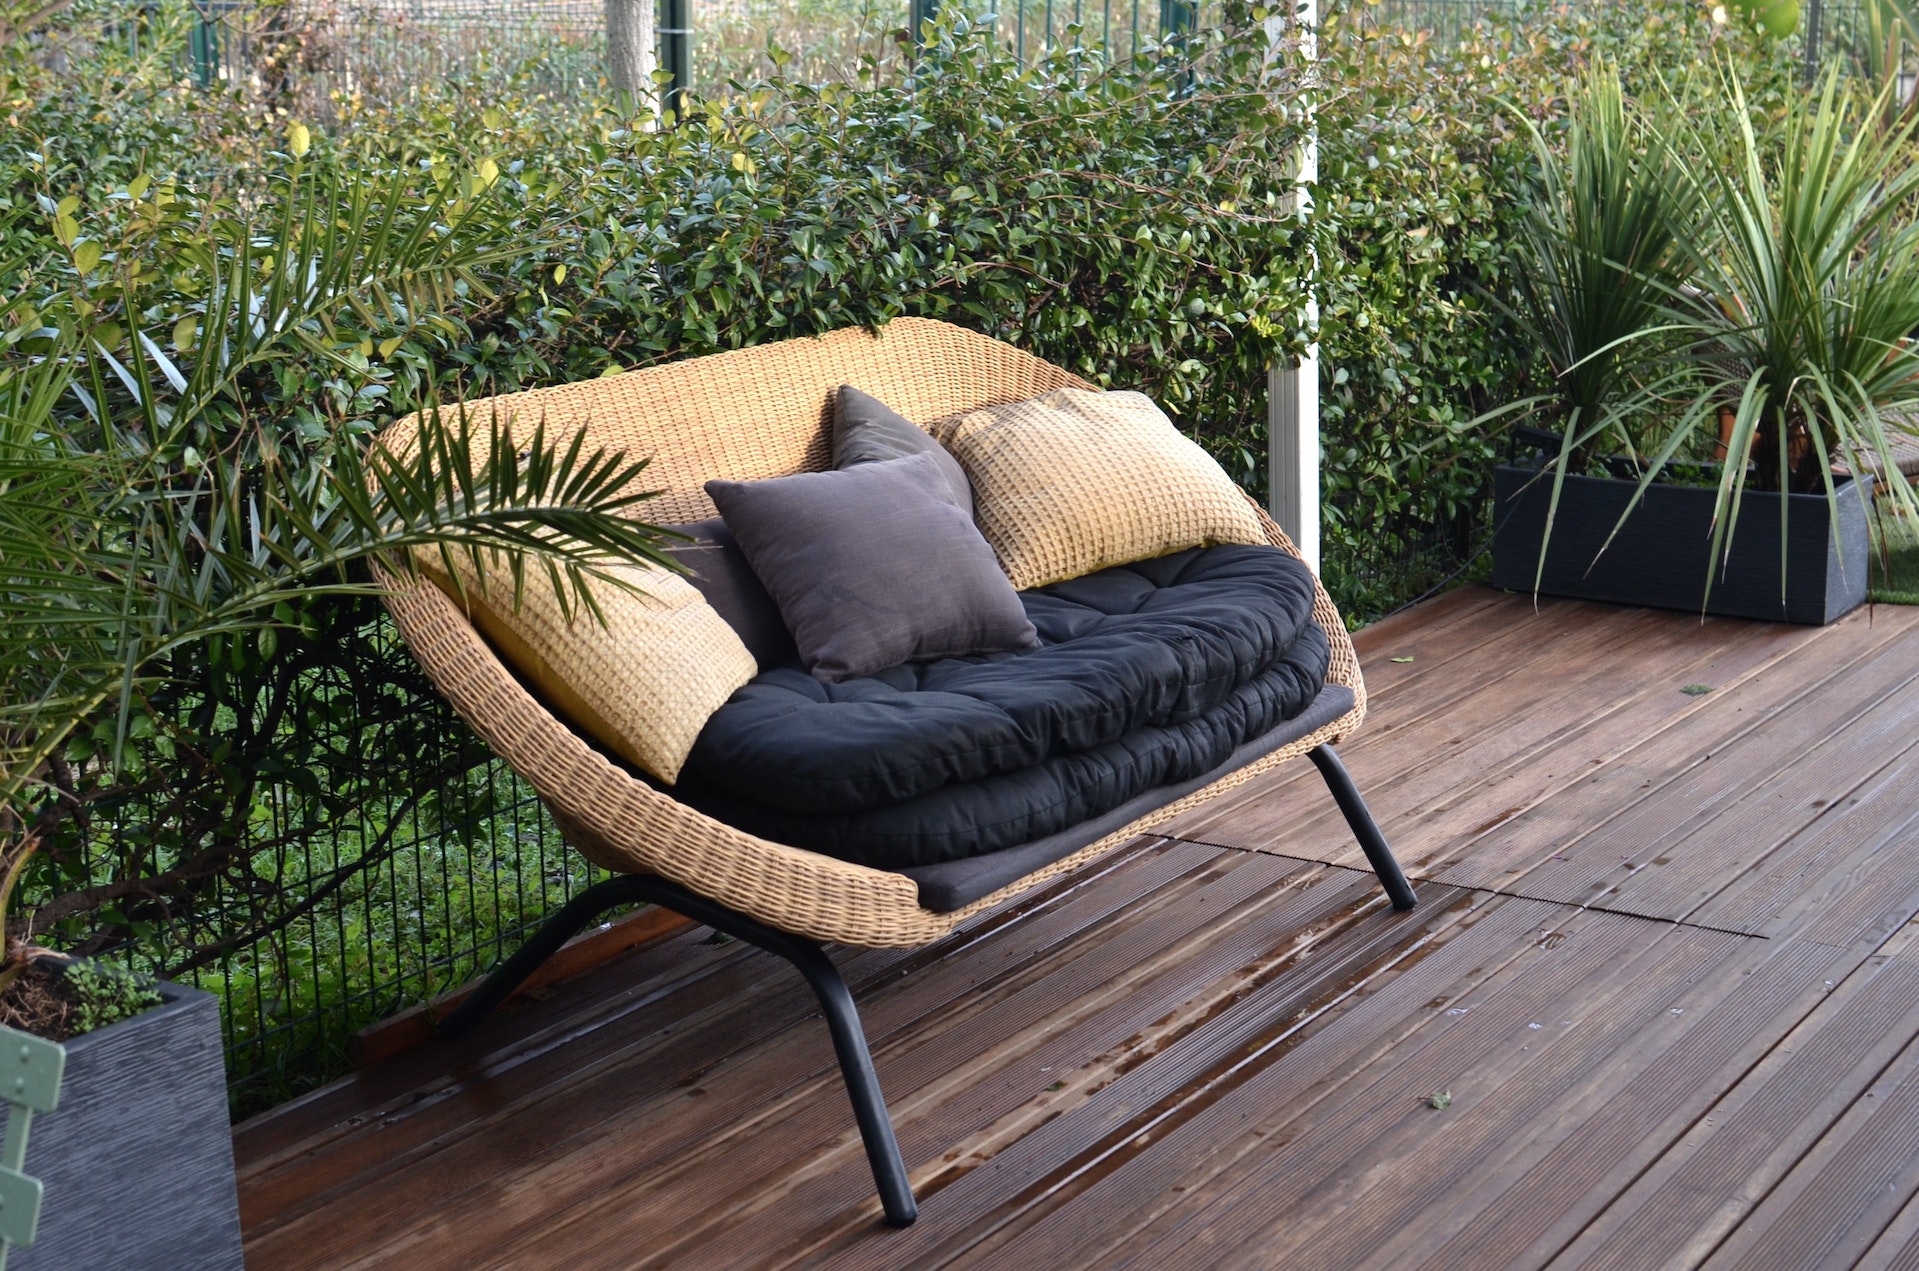 A garden deck in a London garden that requires looking after.